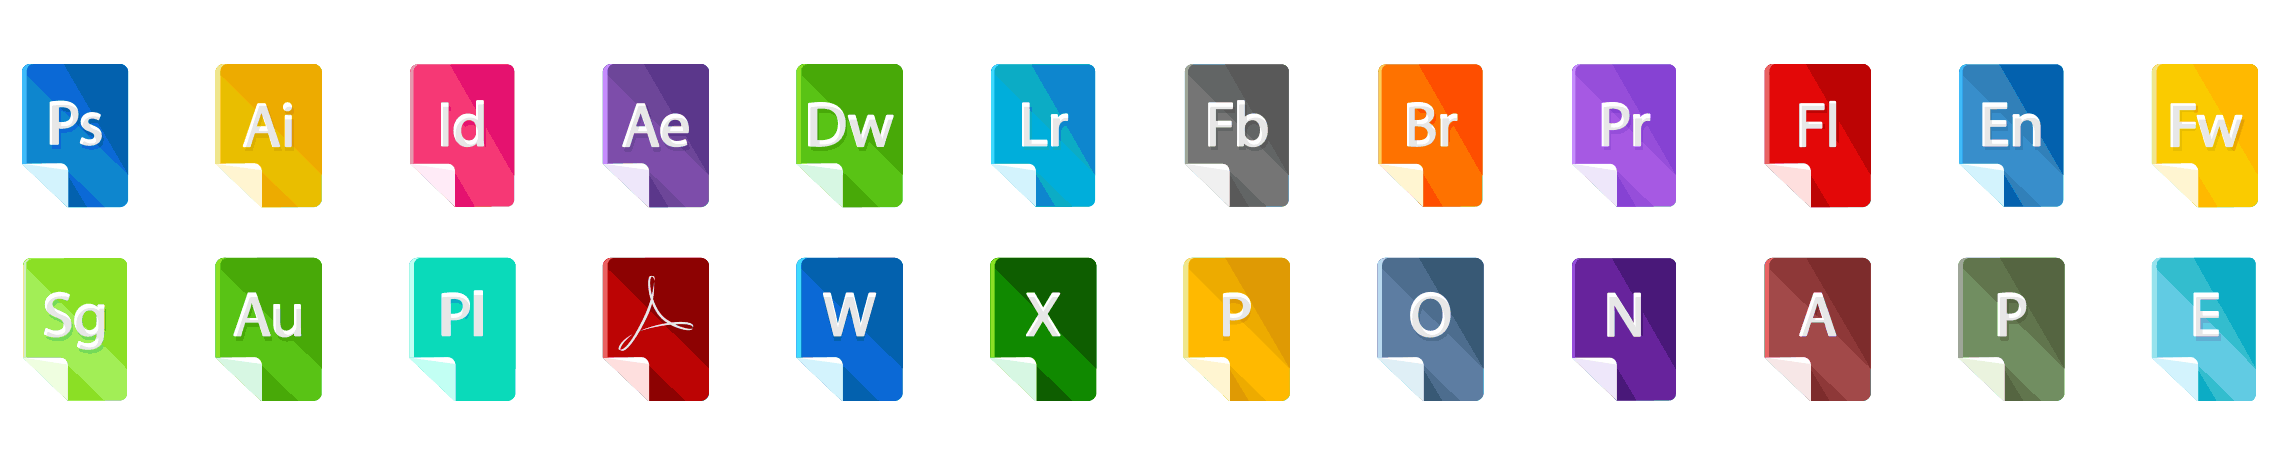 File-Formats-flat-icons